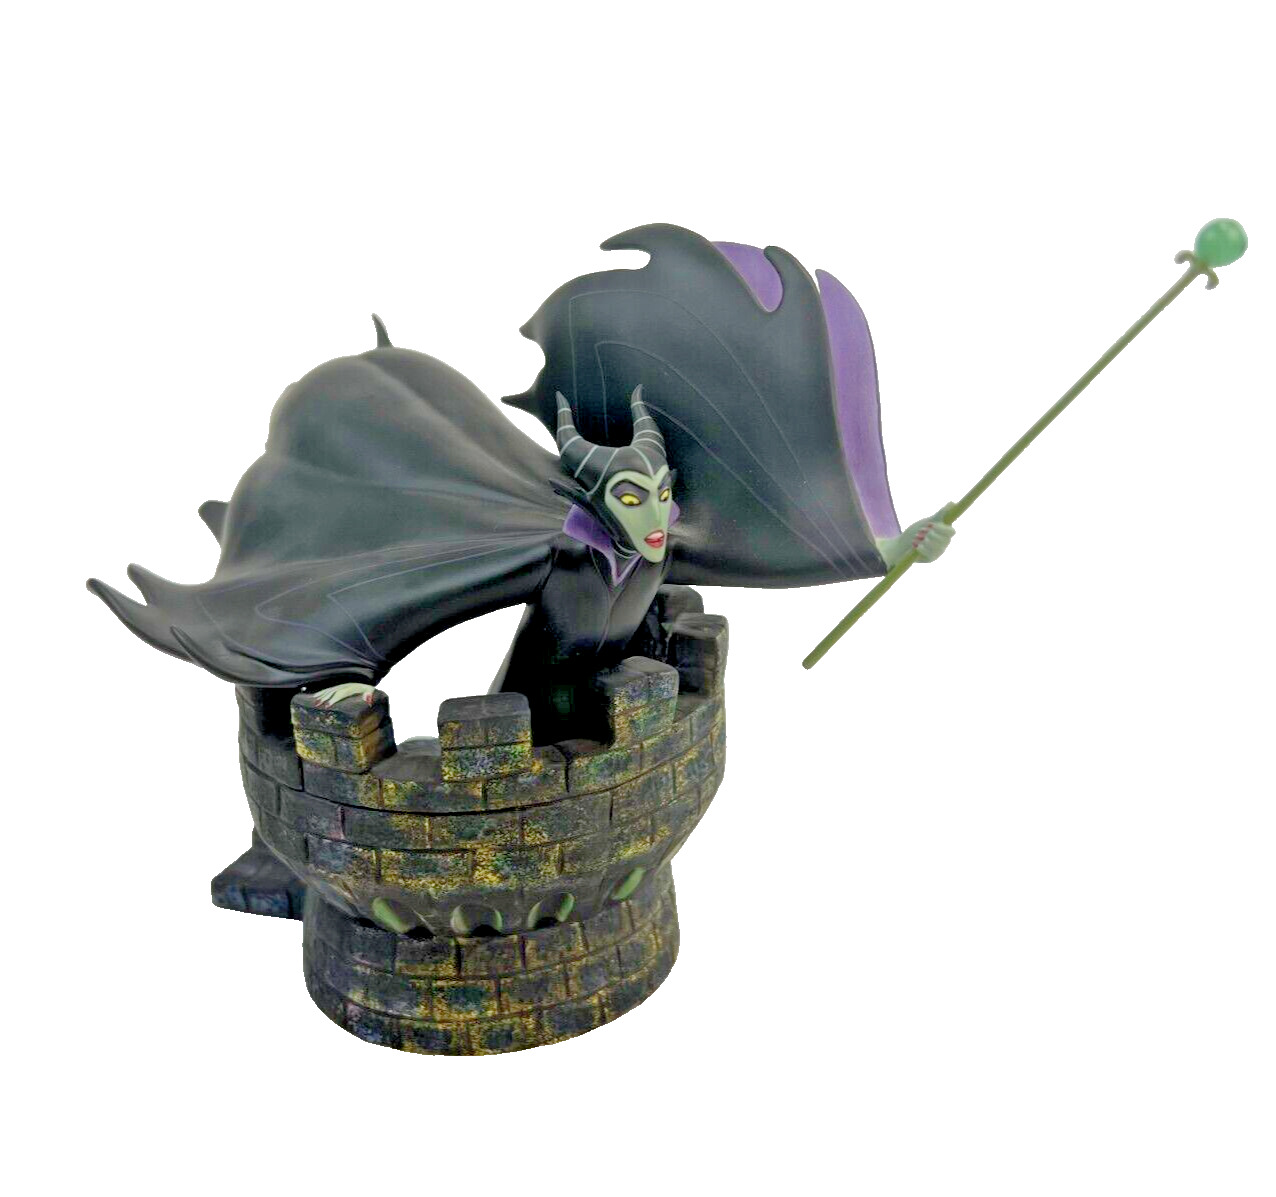 WDCC Disney Classic Figurine the Mistress of All Evil Maleficent Sleeping Beauty